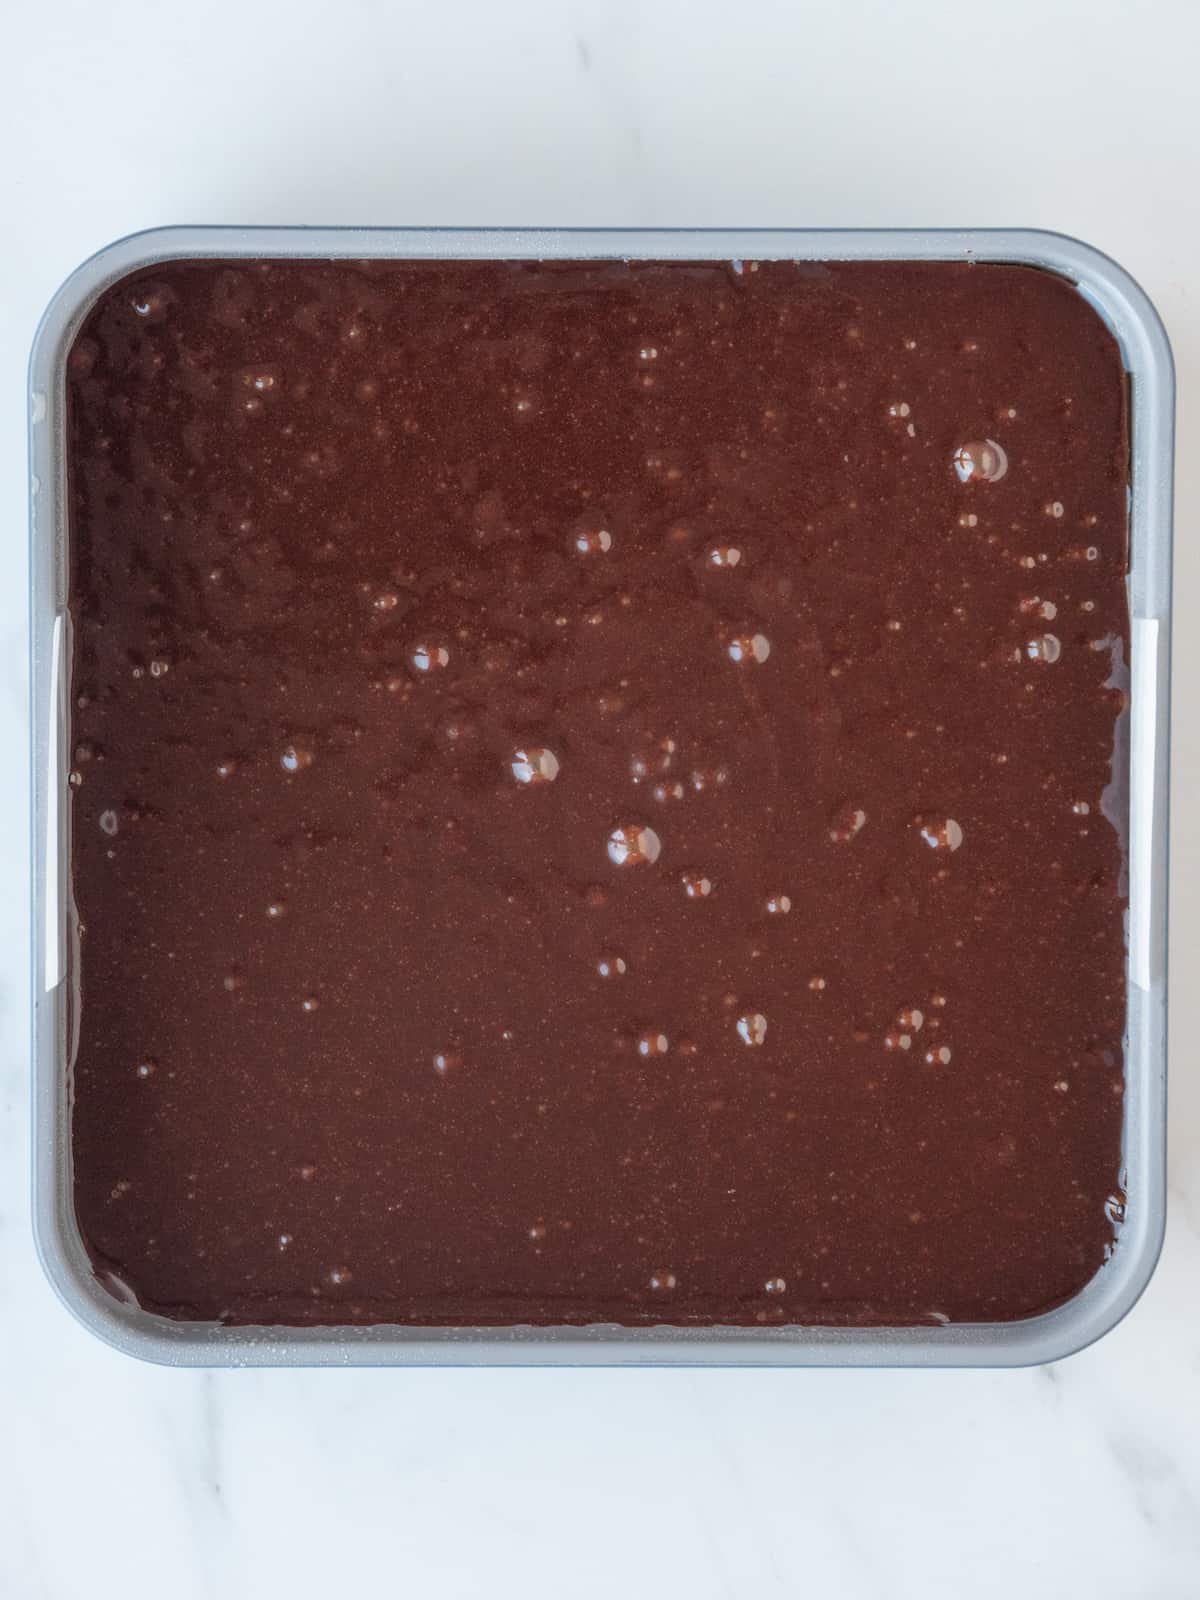 A parchment paper lined 9x9 baking pan with brownie batter poured in, ready to be added to the oven.